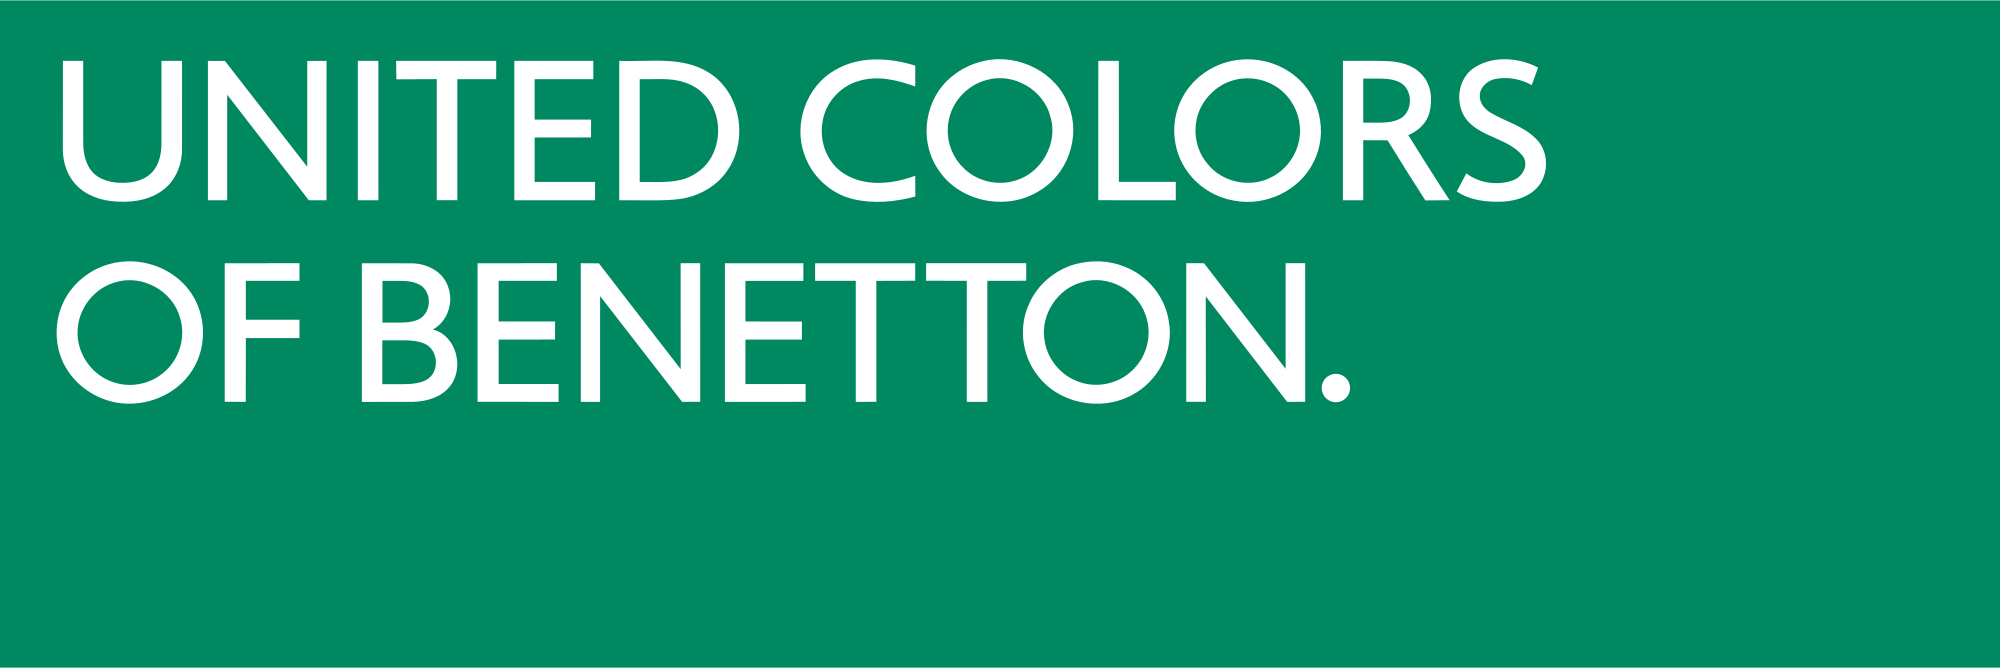 Benetton_Group.png